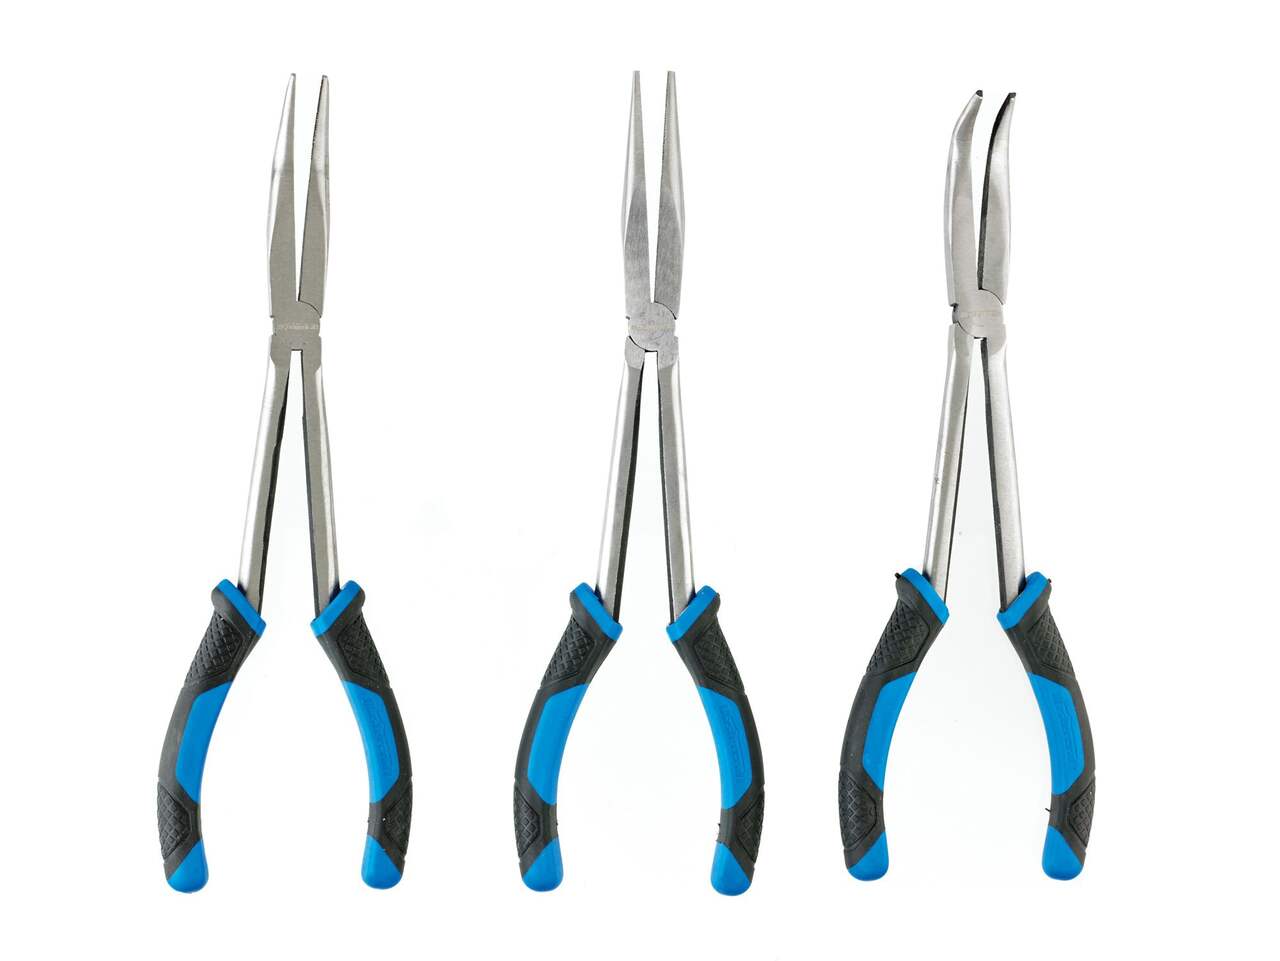 https://media-www.canadiantire.ca/product/fixing/tools/metal-working/0584771/mastercraft-11-long-plier-set-3-pieces-69c3d565-f3e8-4f01-9e01-fc189b6a0094-jpgrendition.jpg?imdensity=1&imwidth=1244&impolicy=mZoom